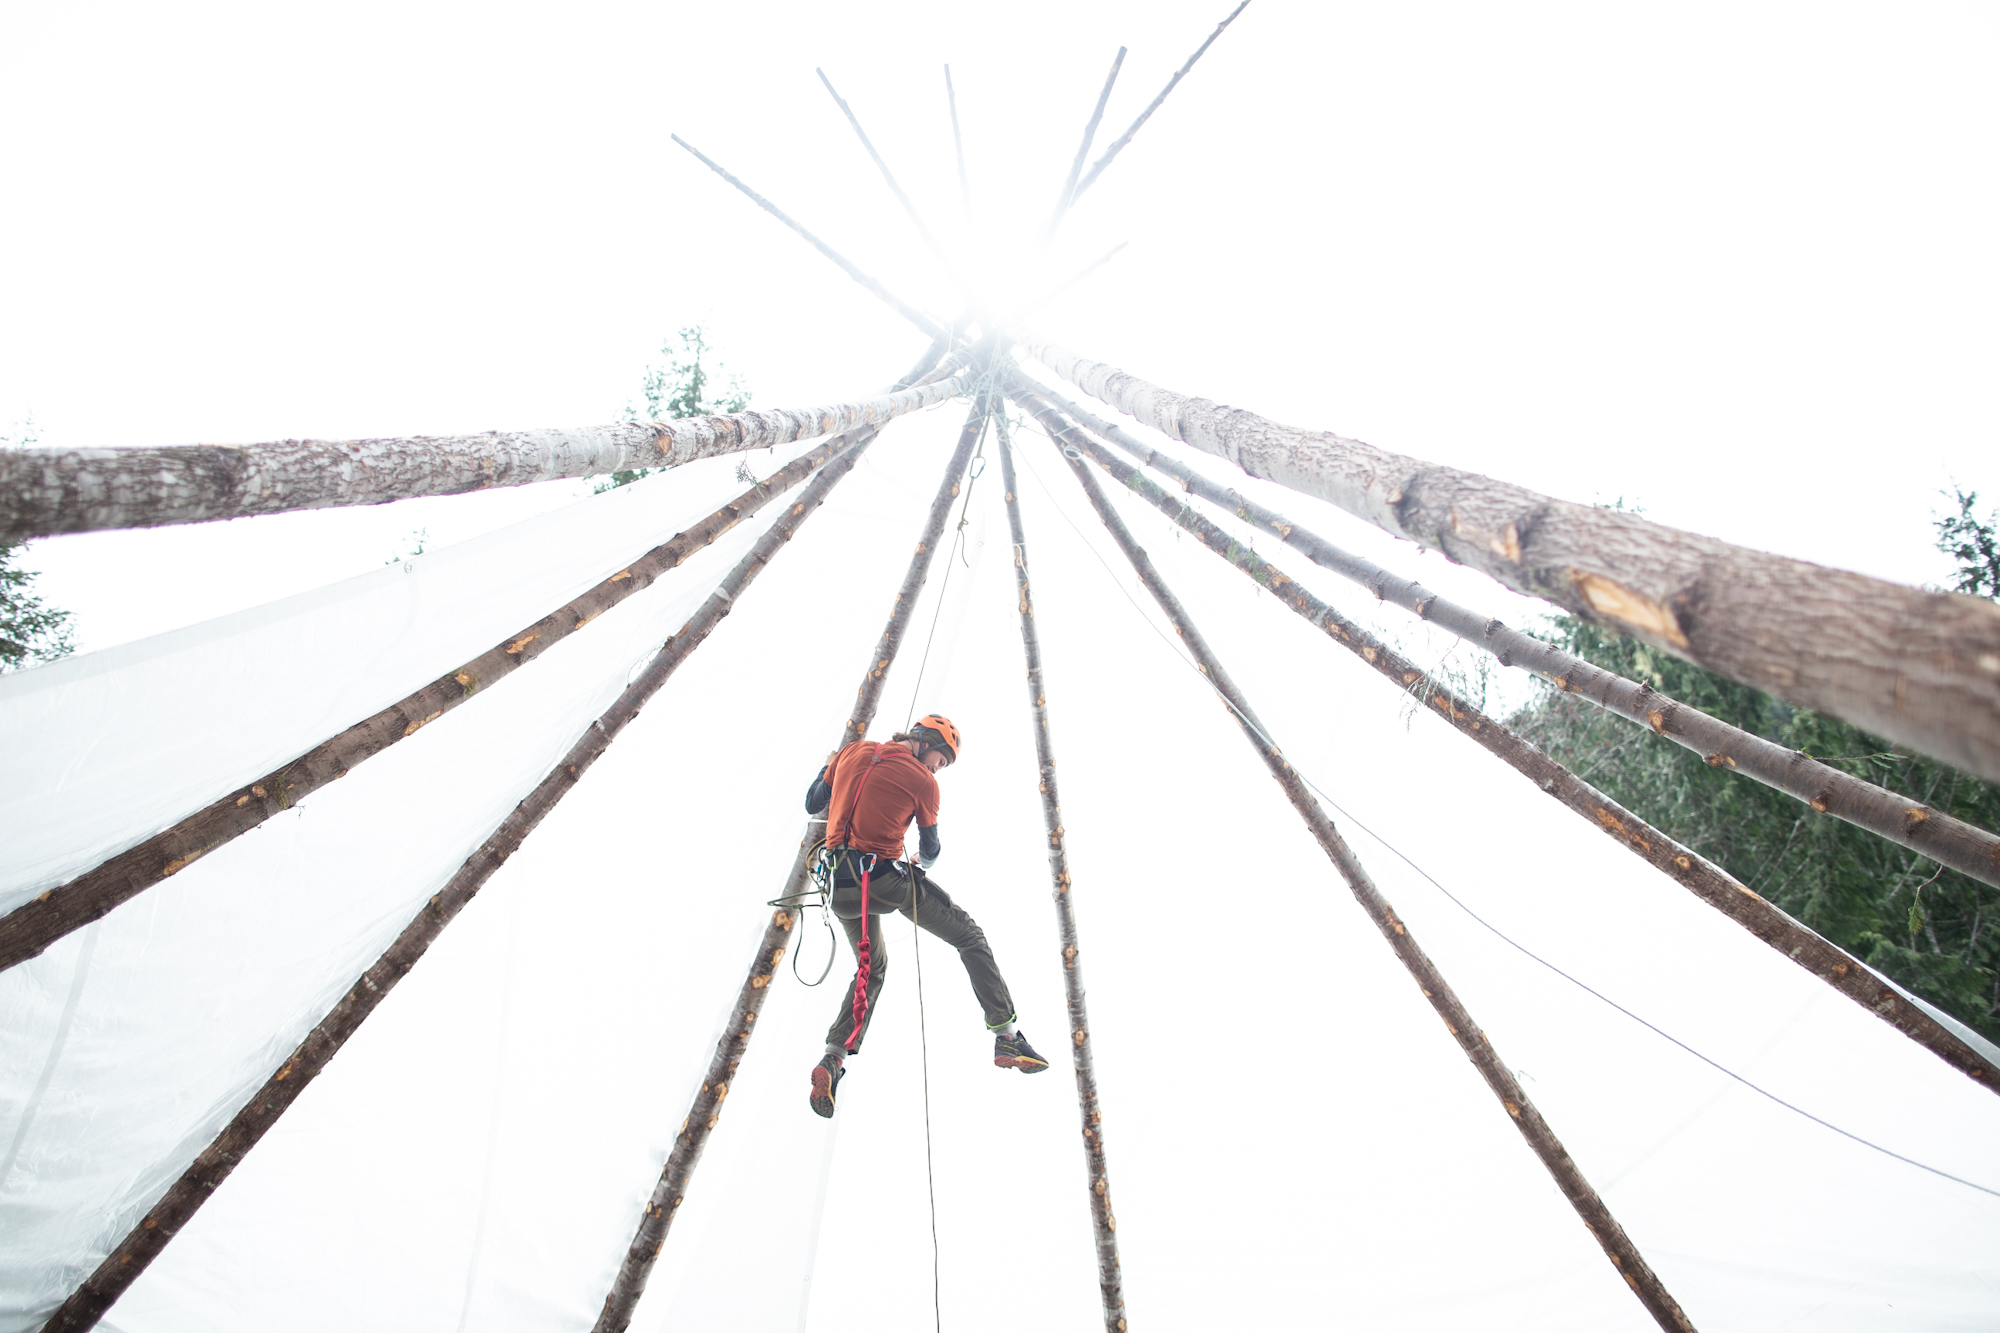 A man rappelling from a wooden tent structure